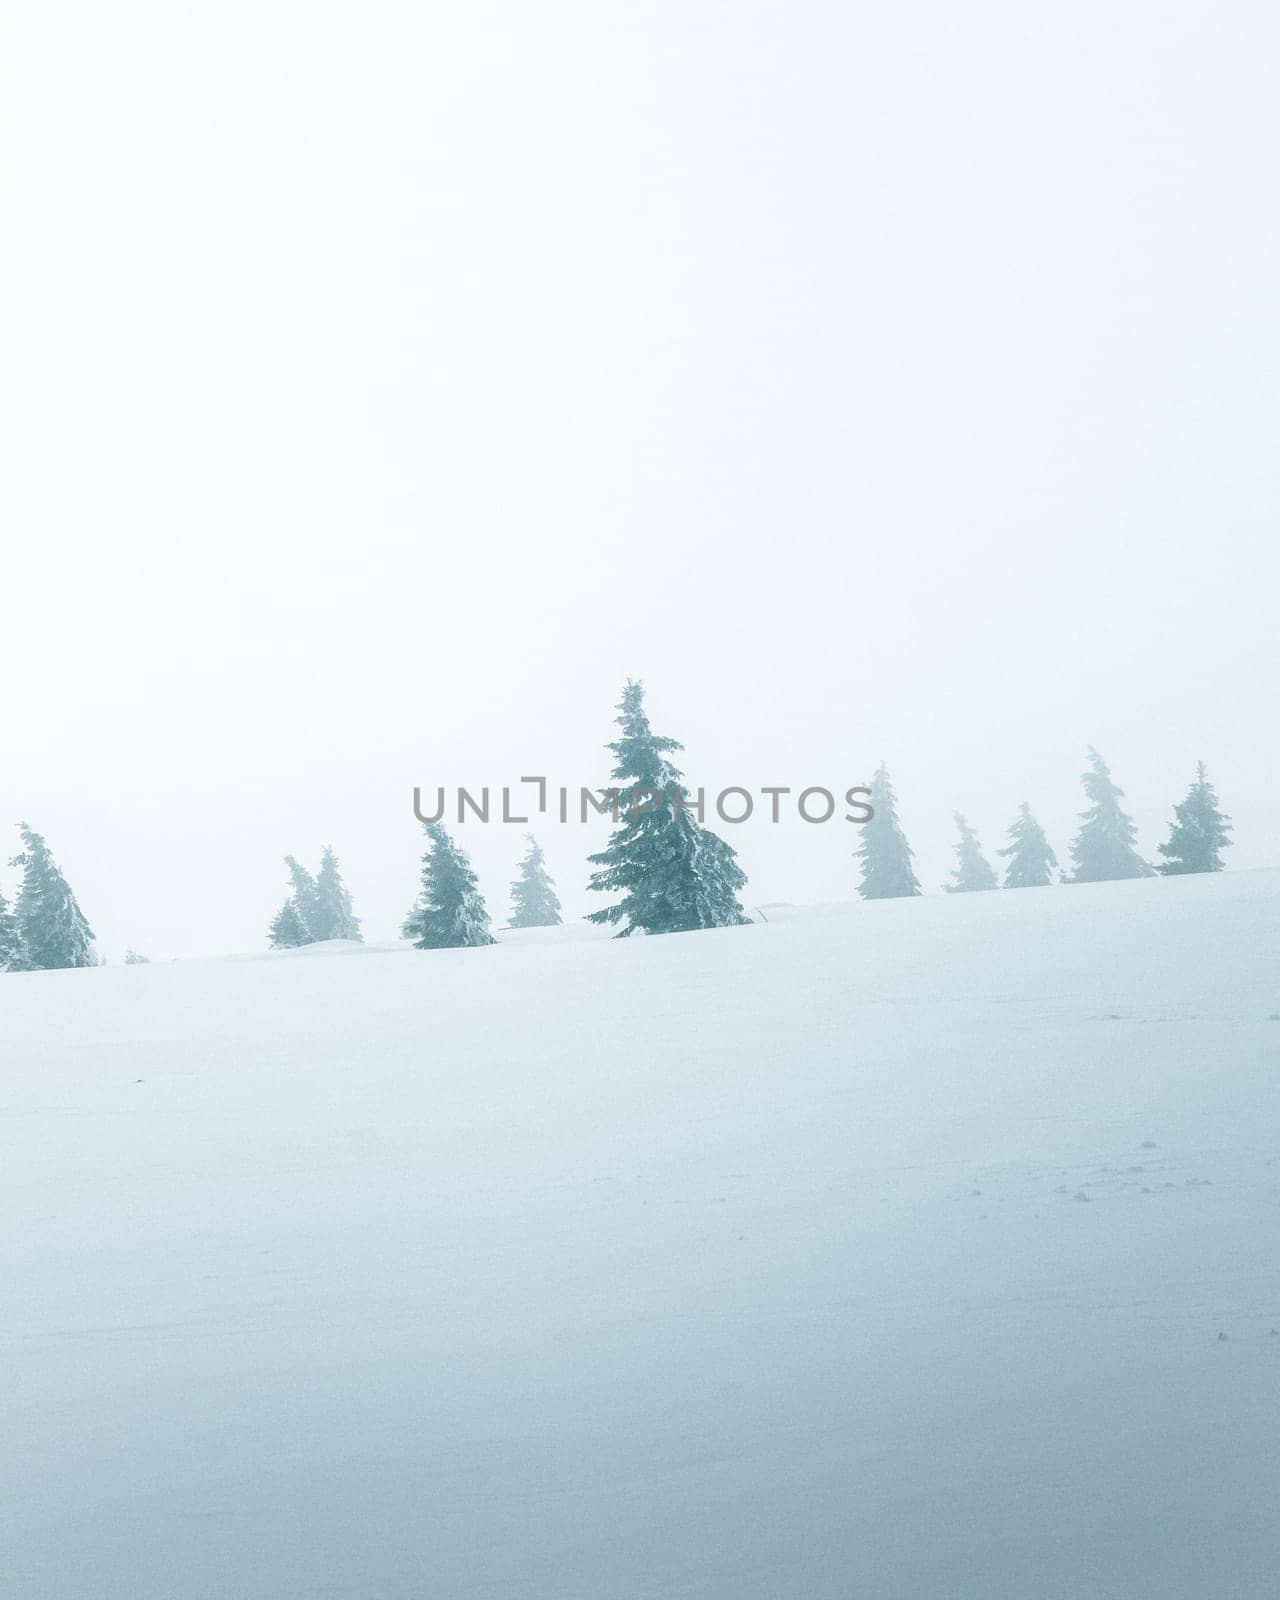 Fir trees in the wind during a snow storm in the mountains by Kustov